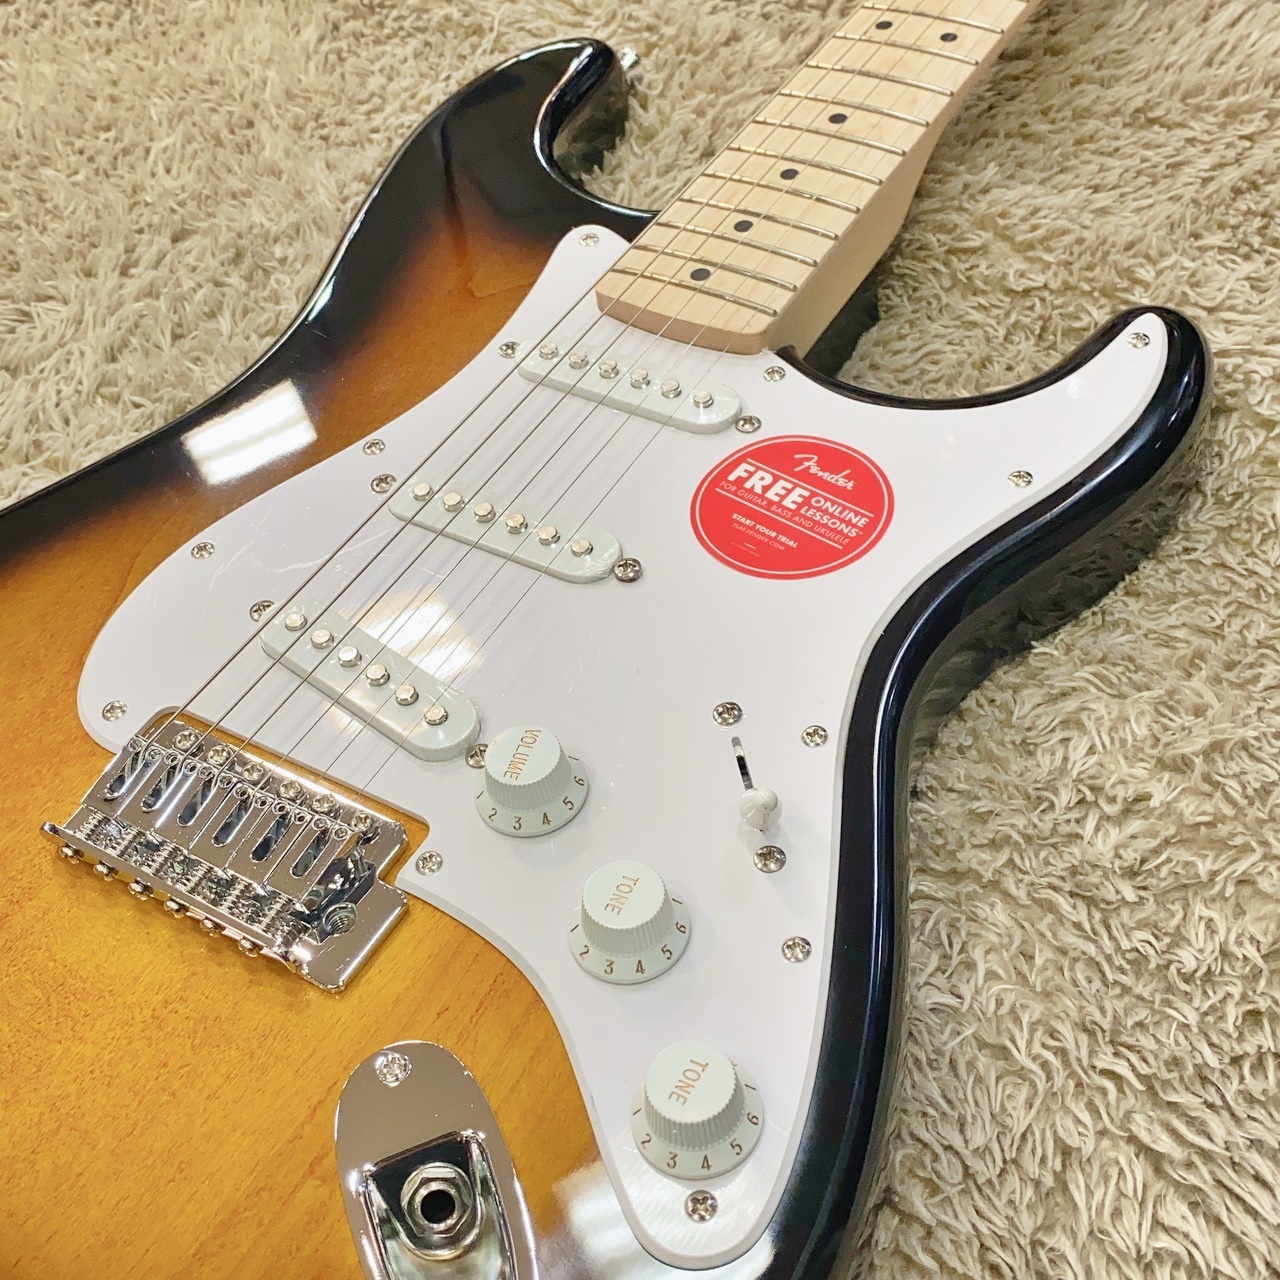 Squier Ⅱ STRATOCASTER by Fender